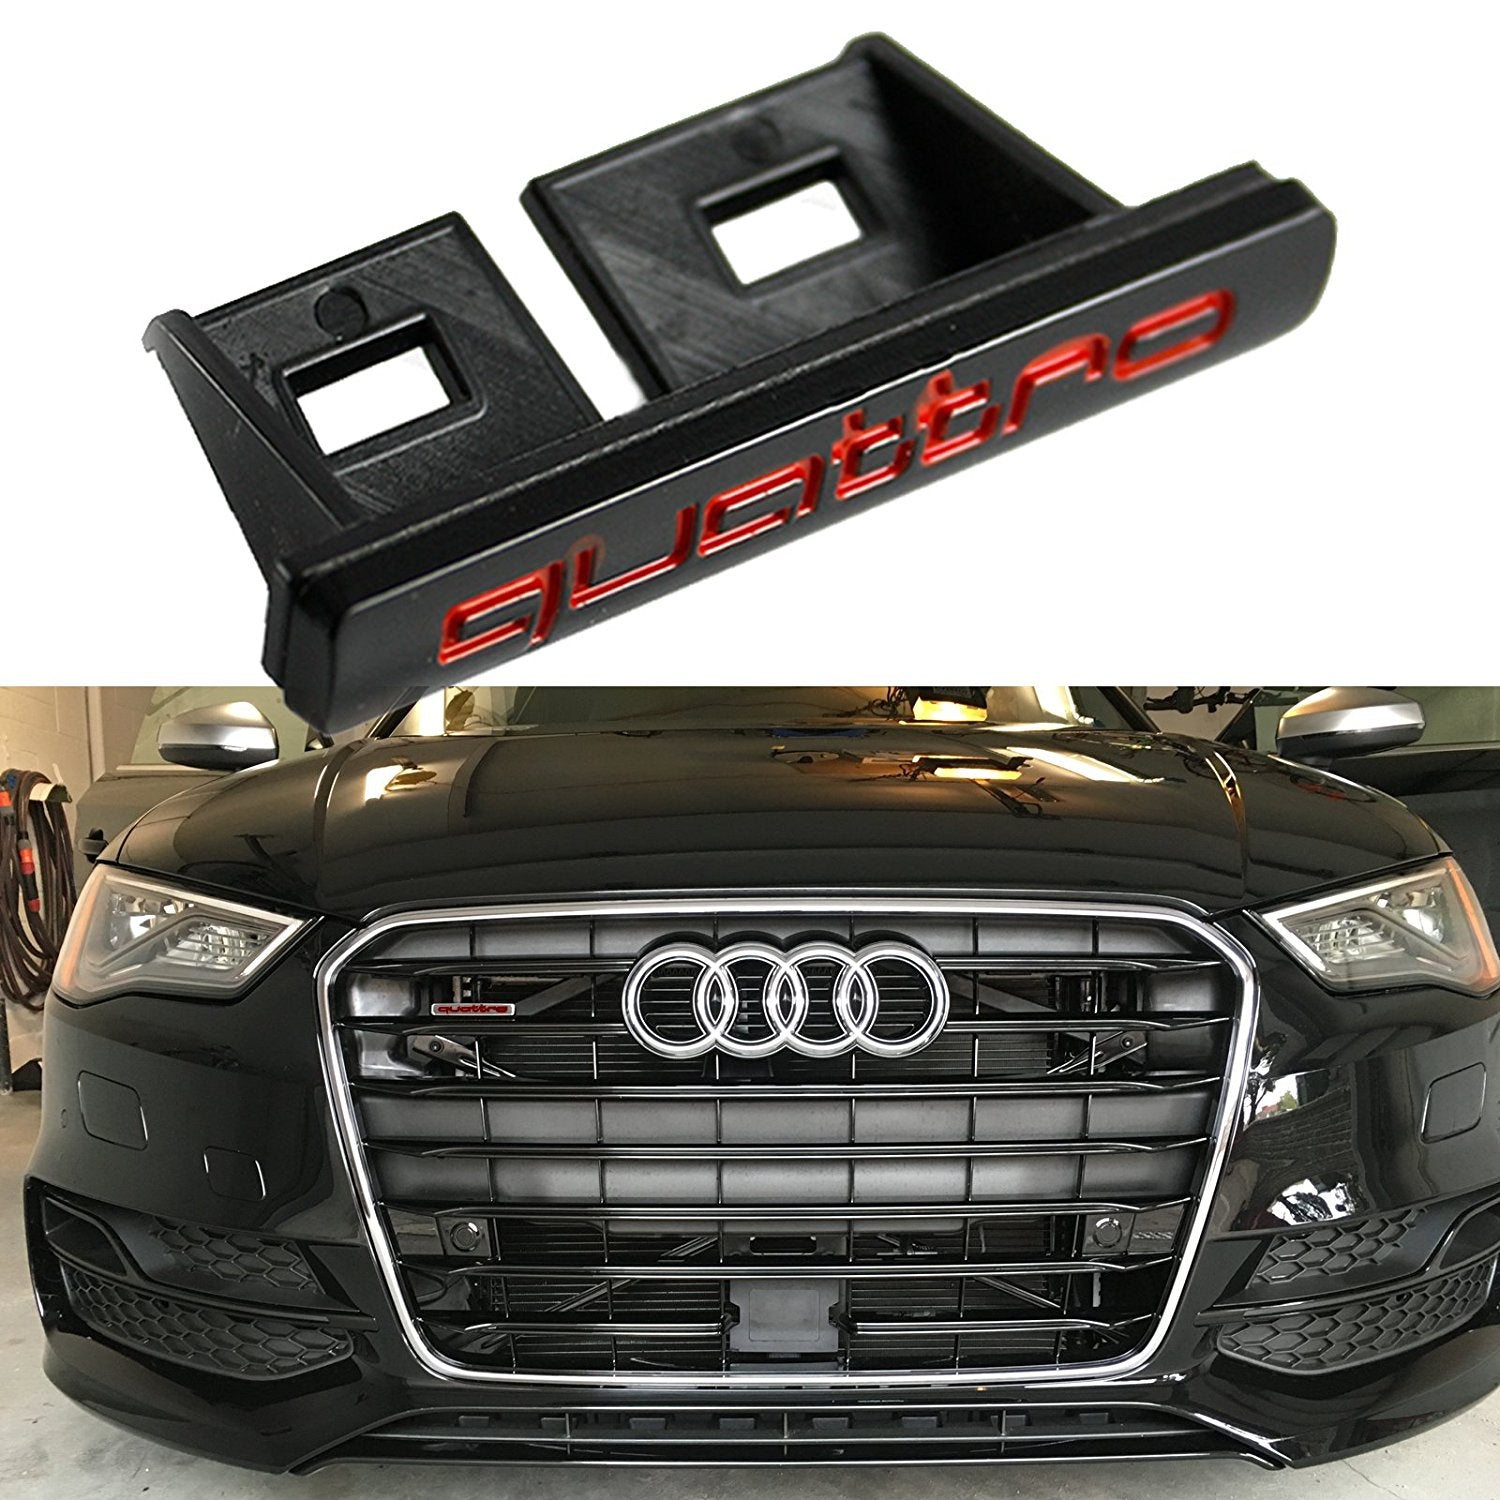 Quattro Front Grille Badge Black Red For Audi S4 S5 S6 S8 A4 | Tech